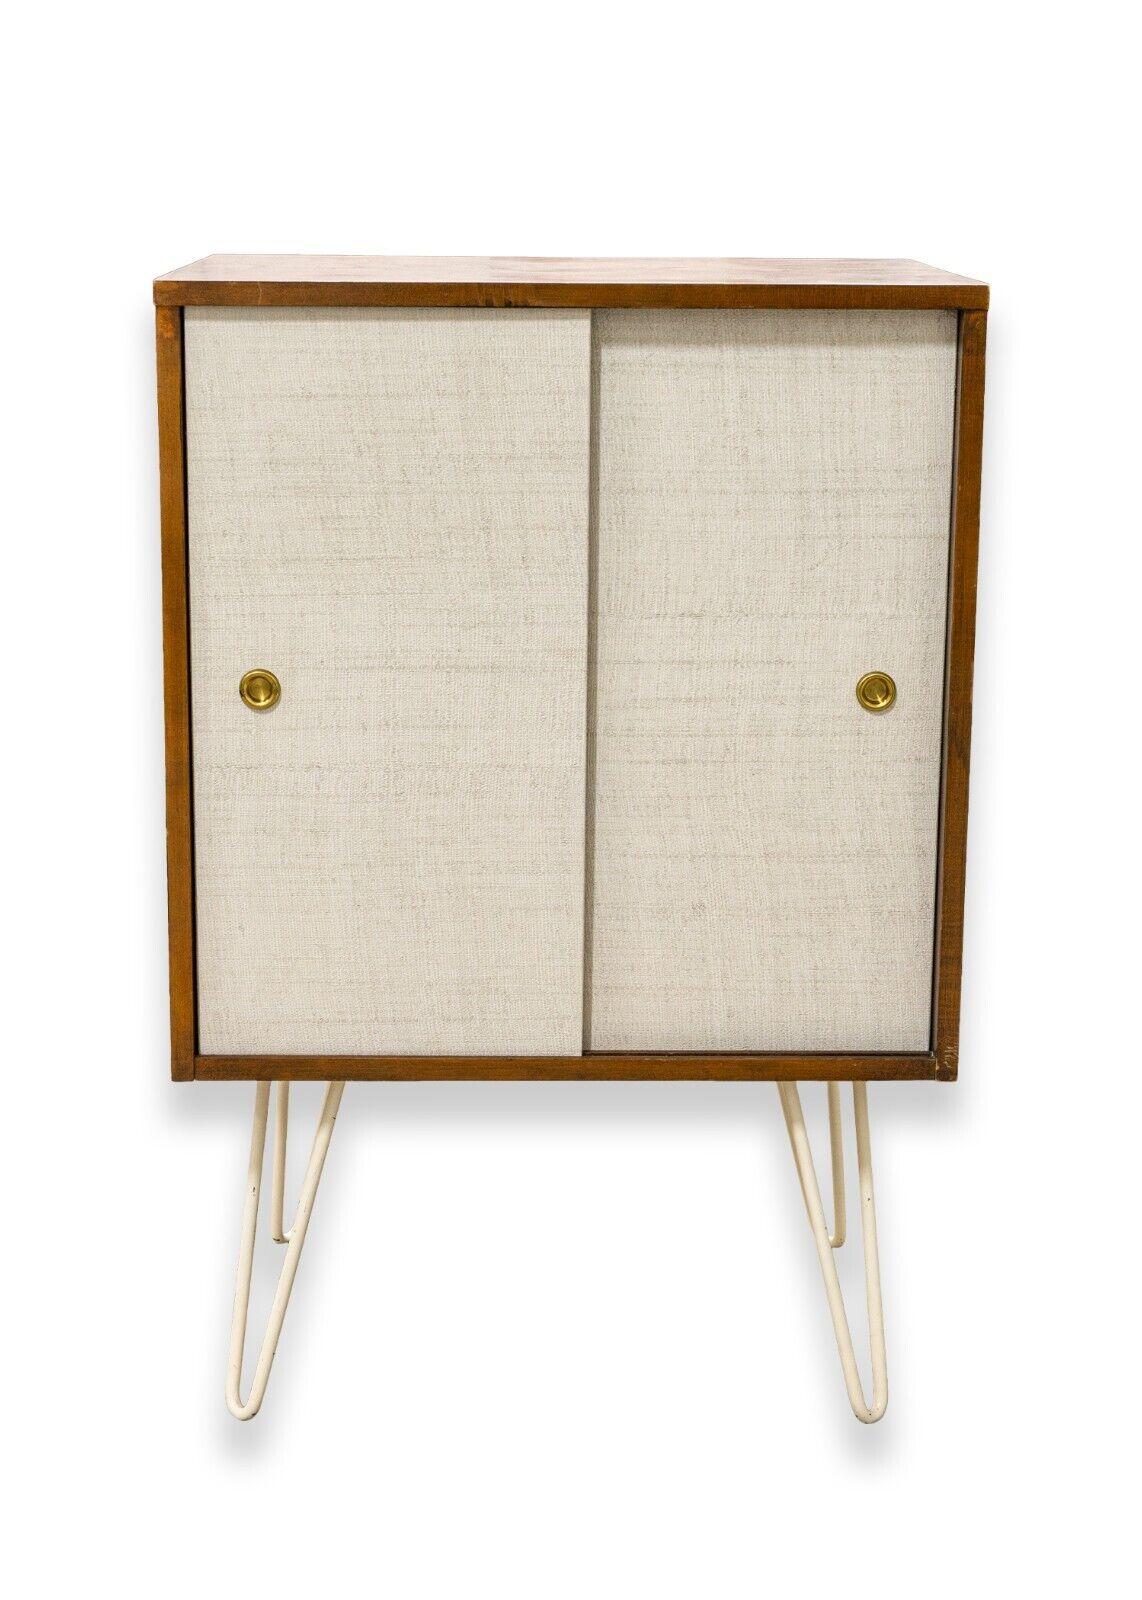 A mid century modern hairpin leg sliding door cabinet. A very pretty little cabinet featuring white metal hair pin legs, a full wood construction, white sliding doors, and brass indented door nobs. There are two shelves on the inside for ample